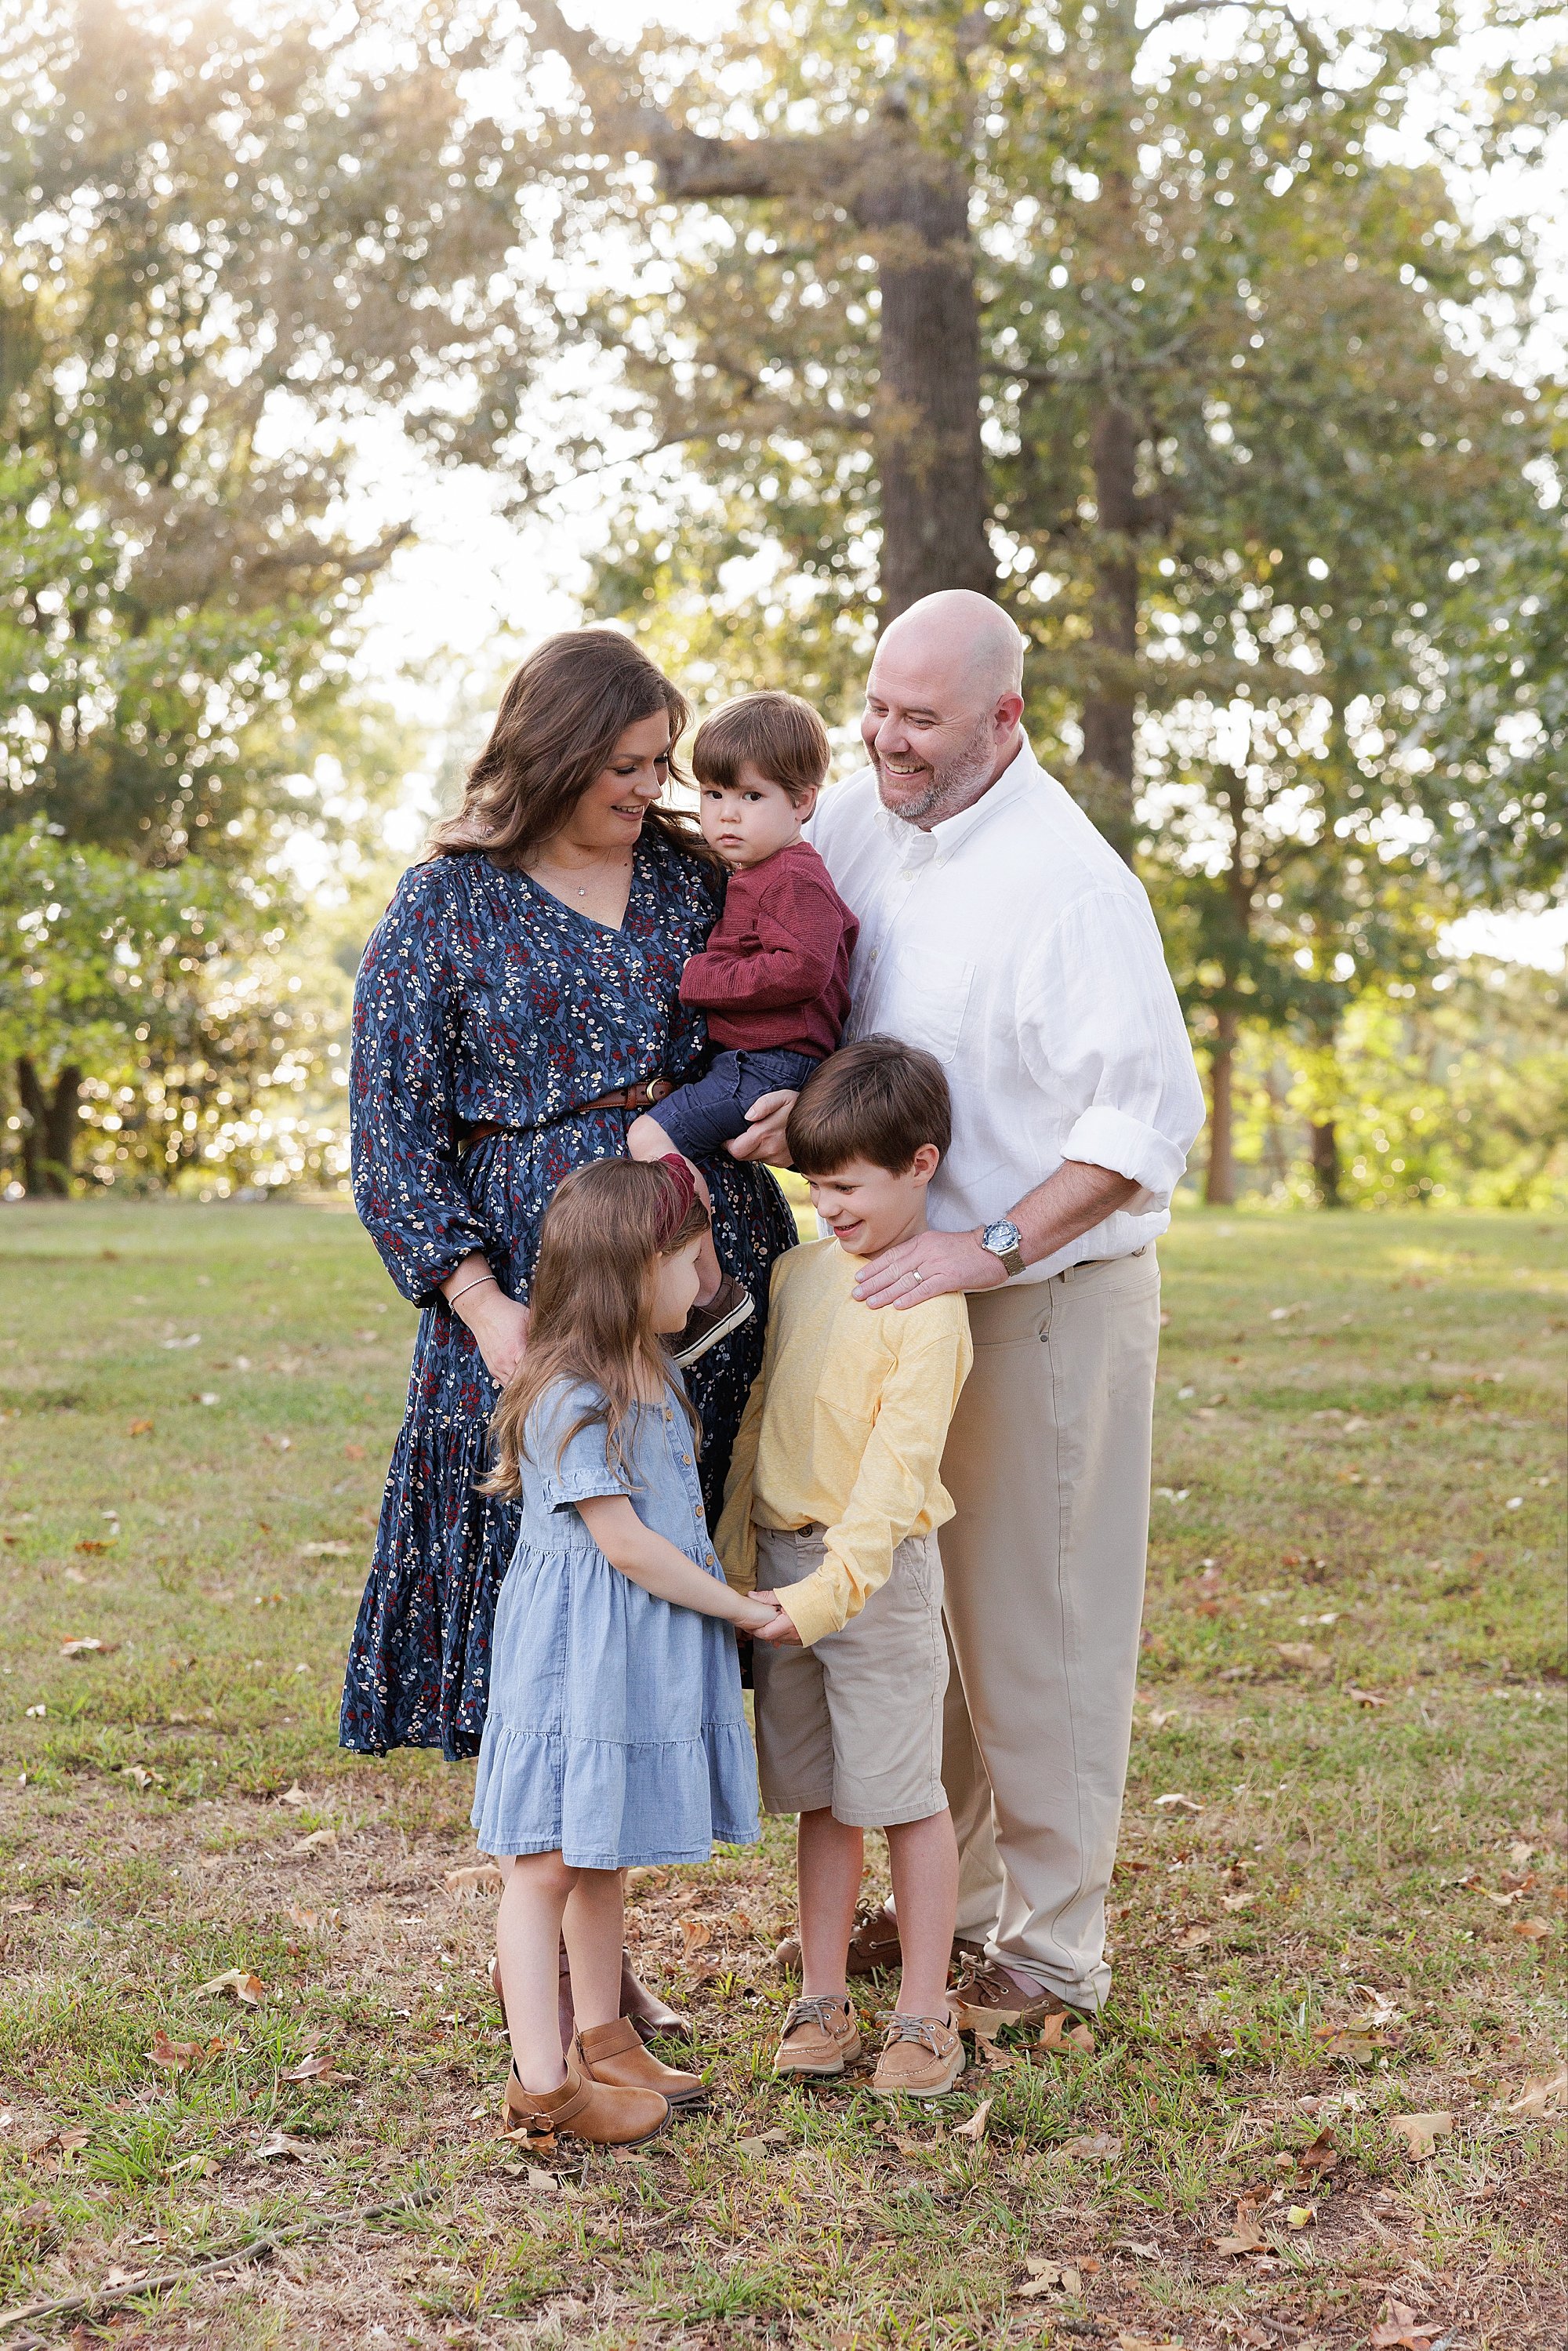 intown-atlanta-decatur-brookhaven-buckhead-outdoor-fall-pictures-family-photoshoot_5520.jpg